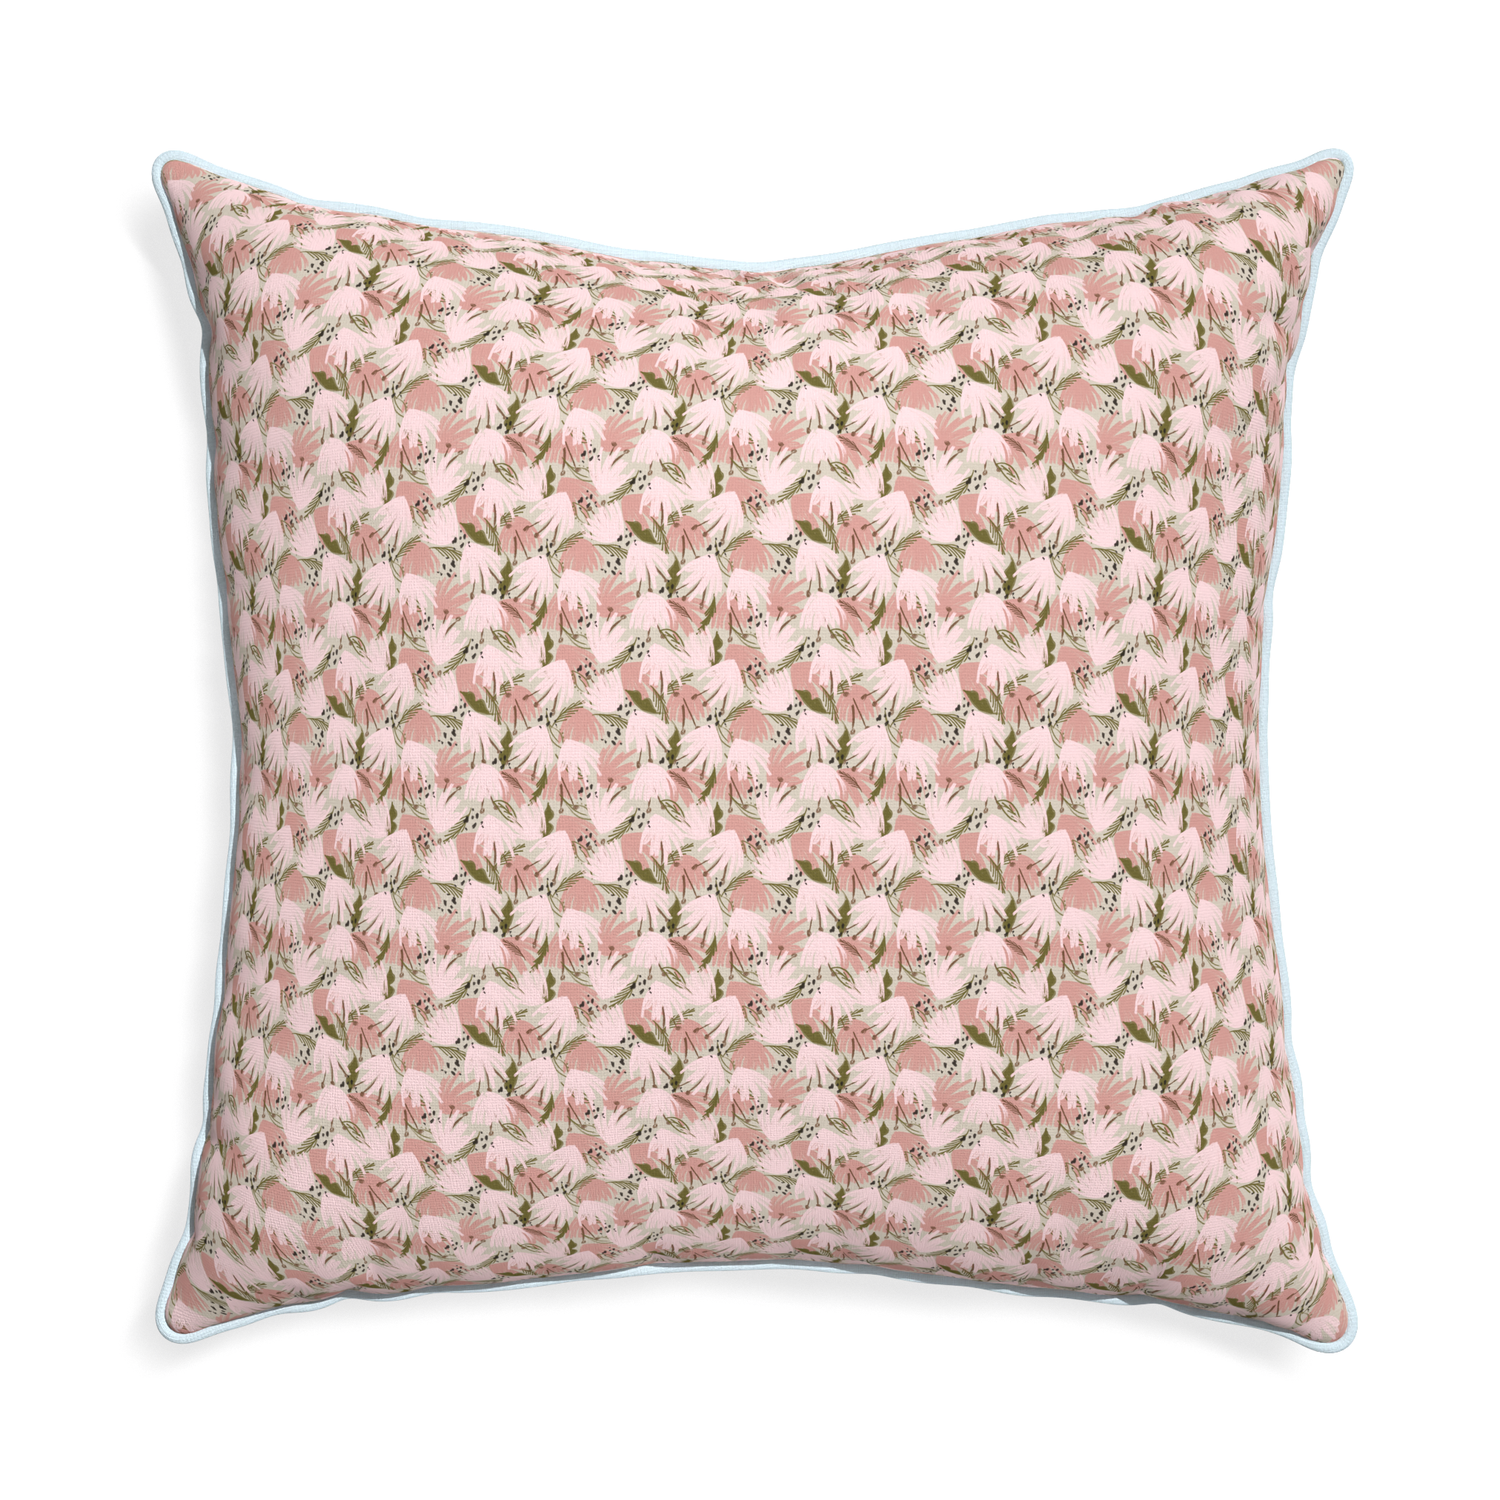 Euro-sham eden pink custom pillow with powder piping on white background